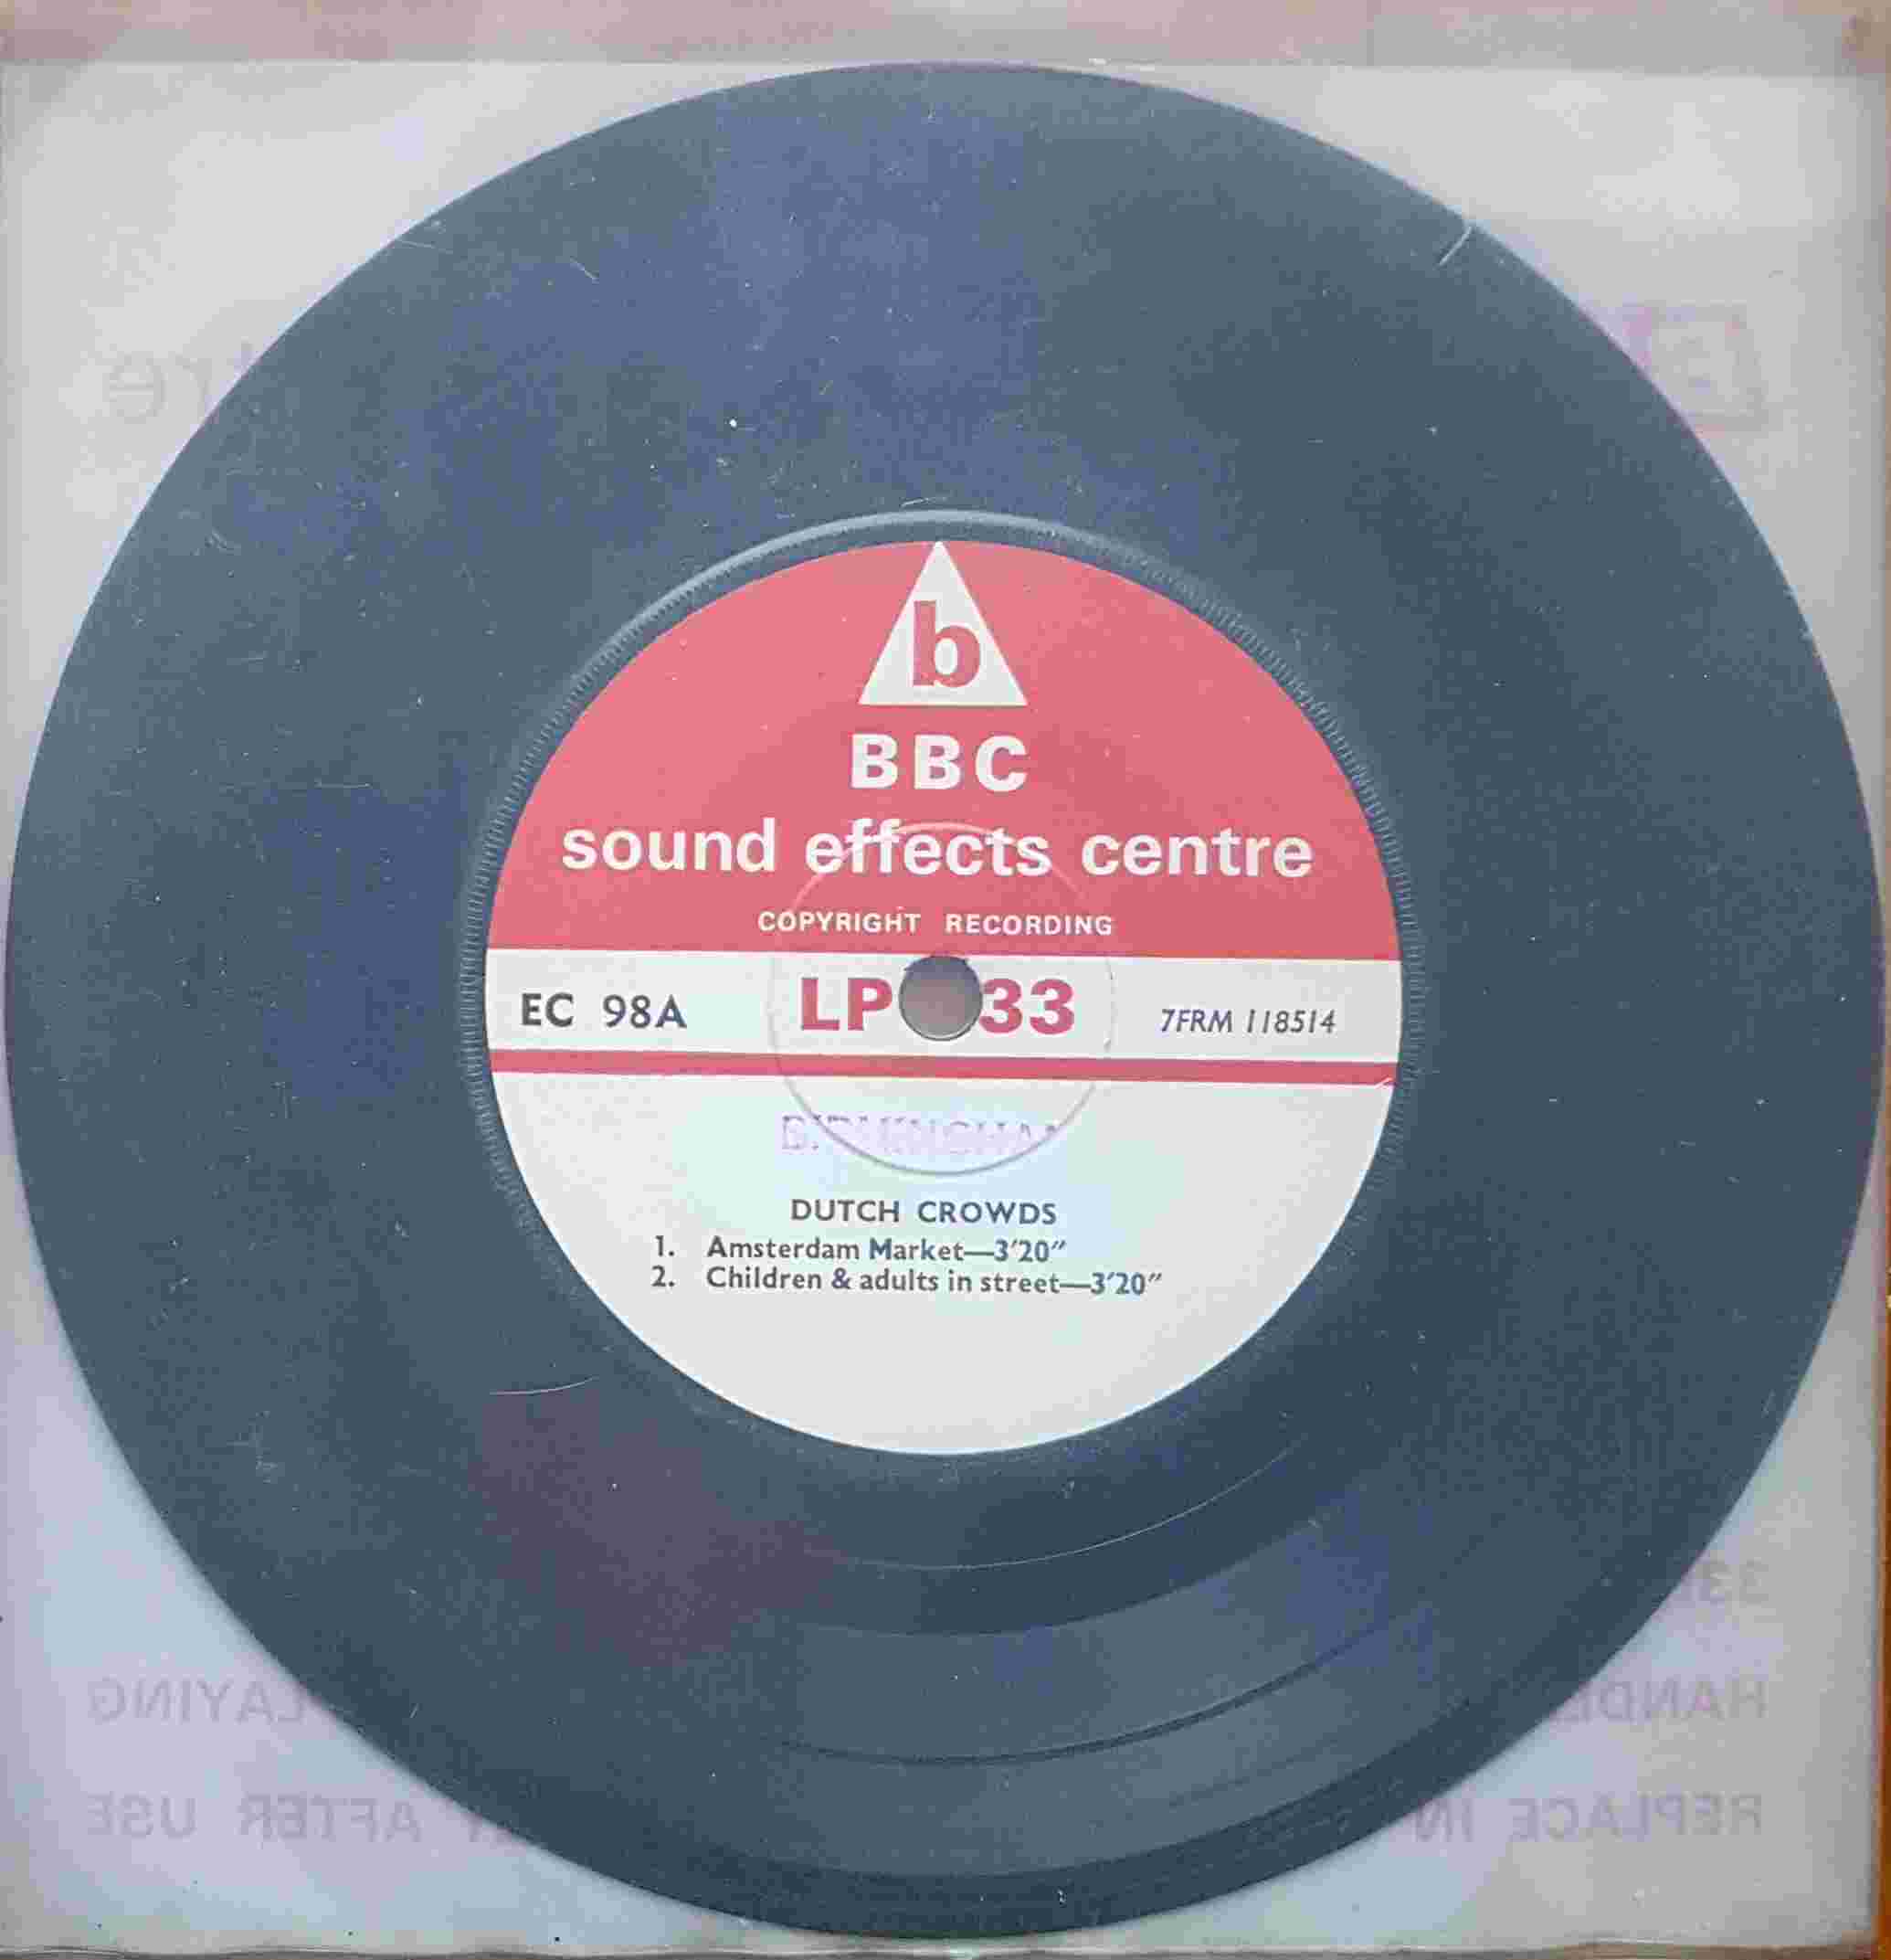 Picture of EC 98A Dutch crowds by artist Not registered from the BBC records and Tapes library